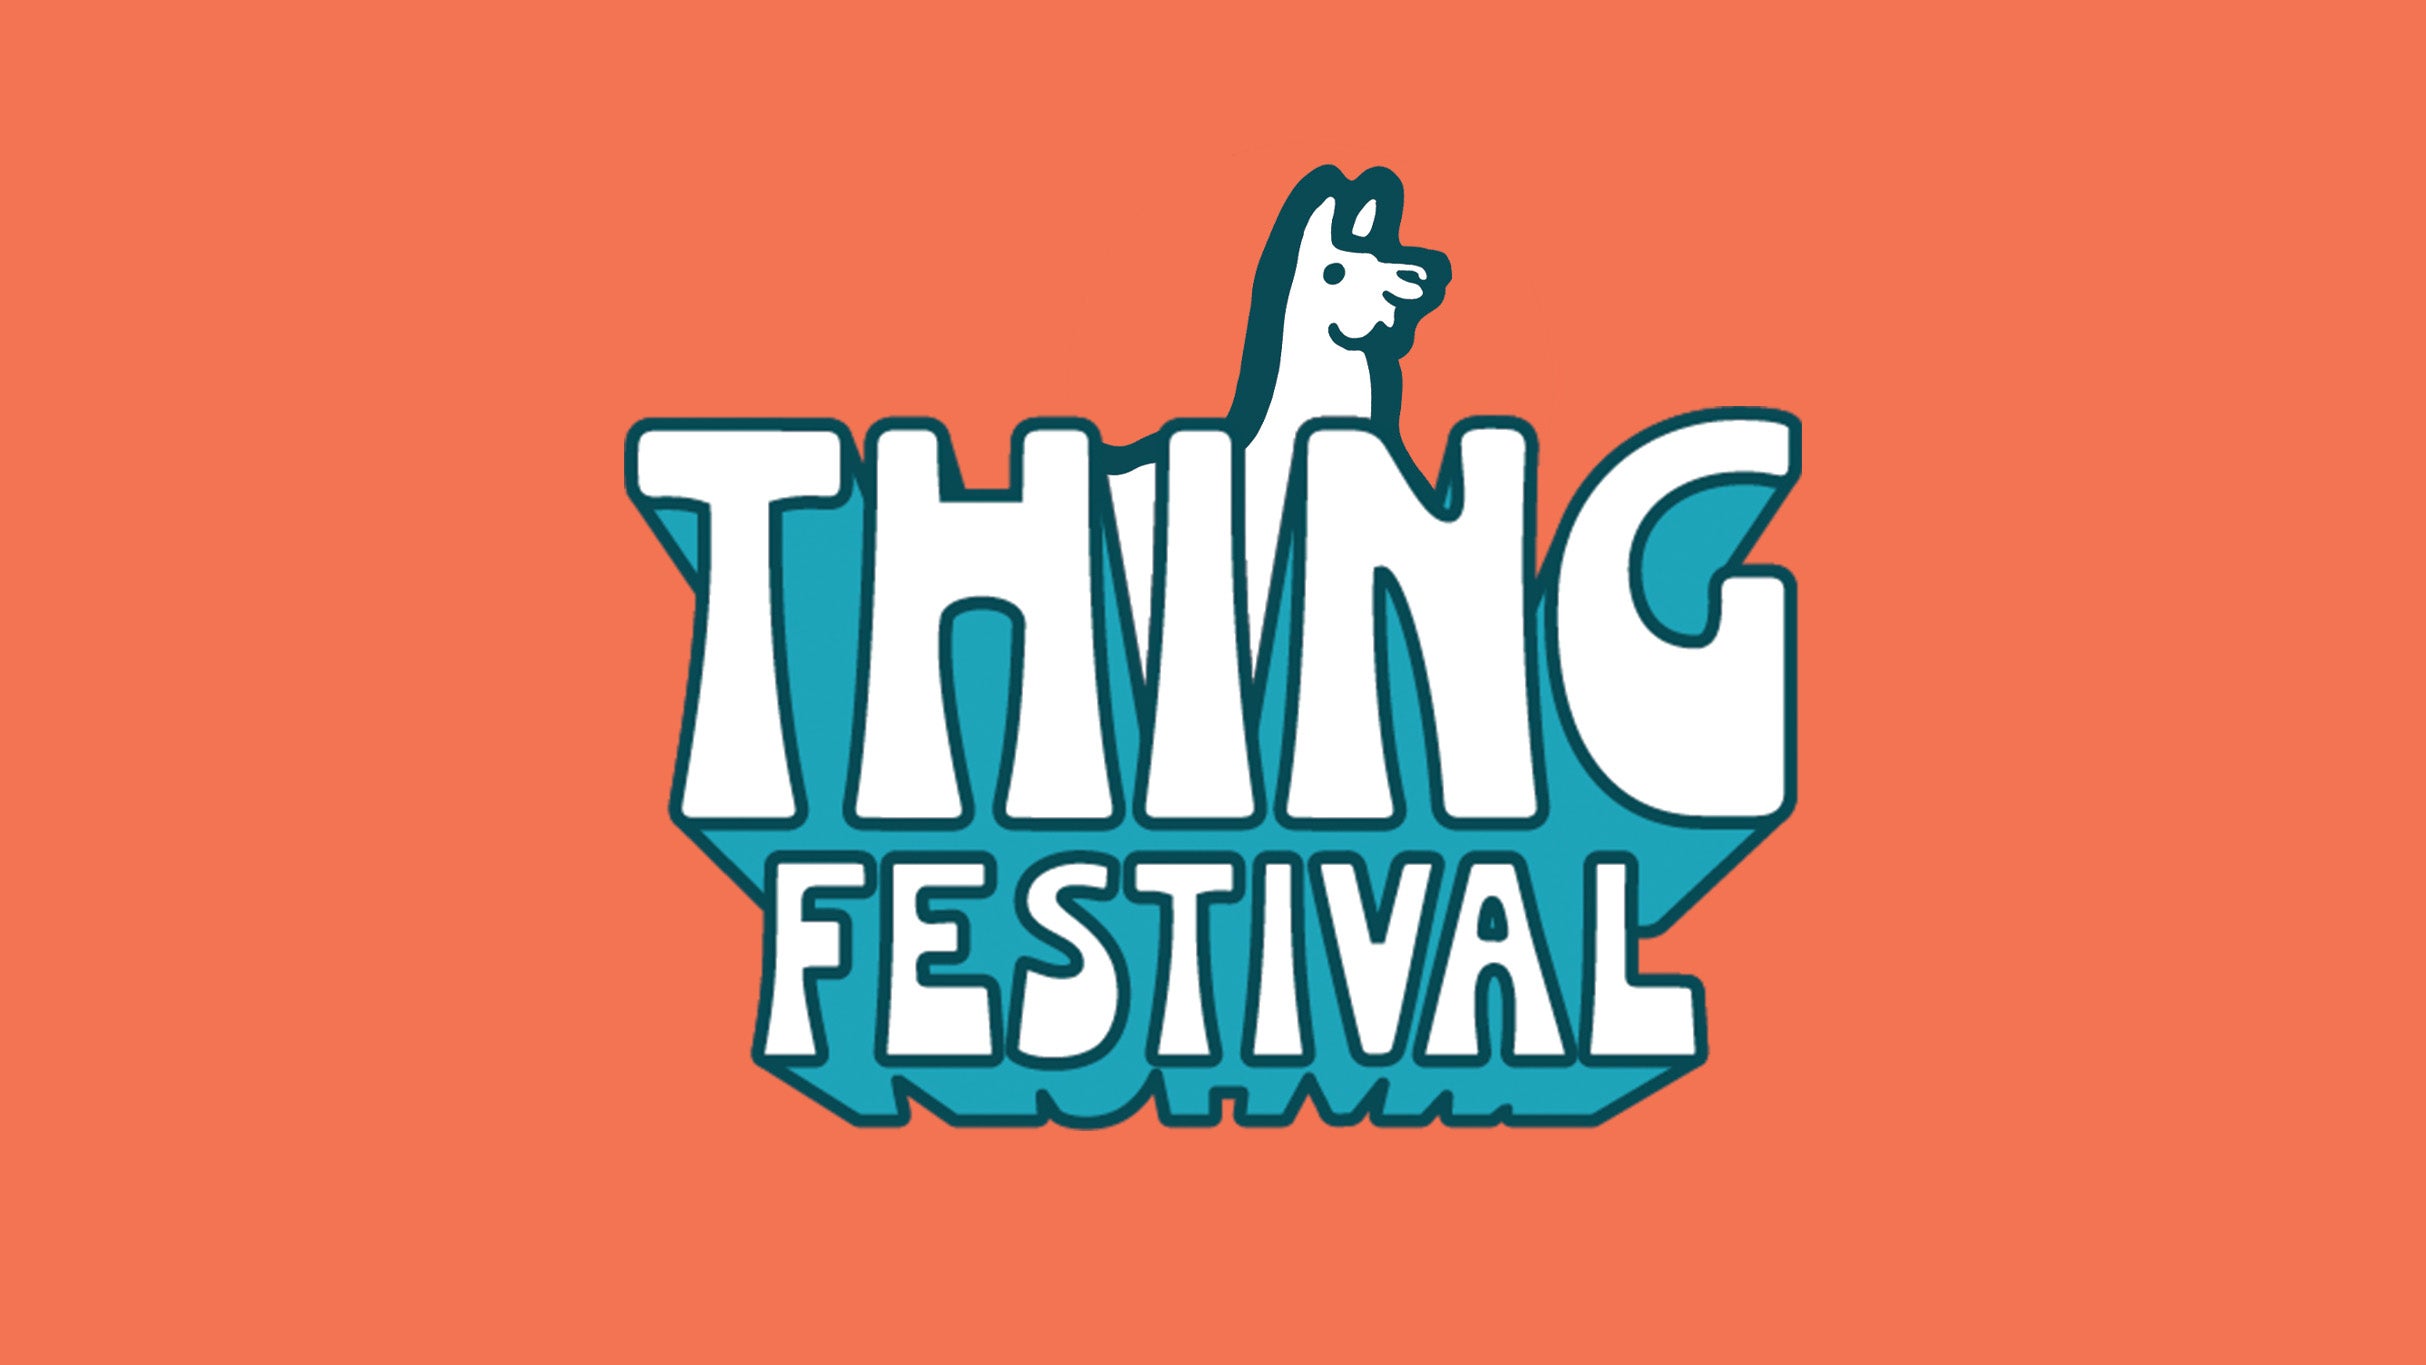 THING Festival presales in Carnation